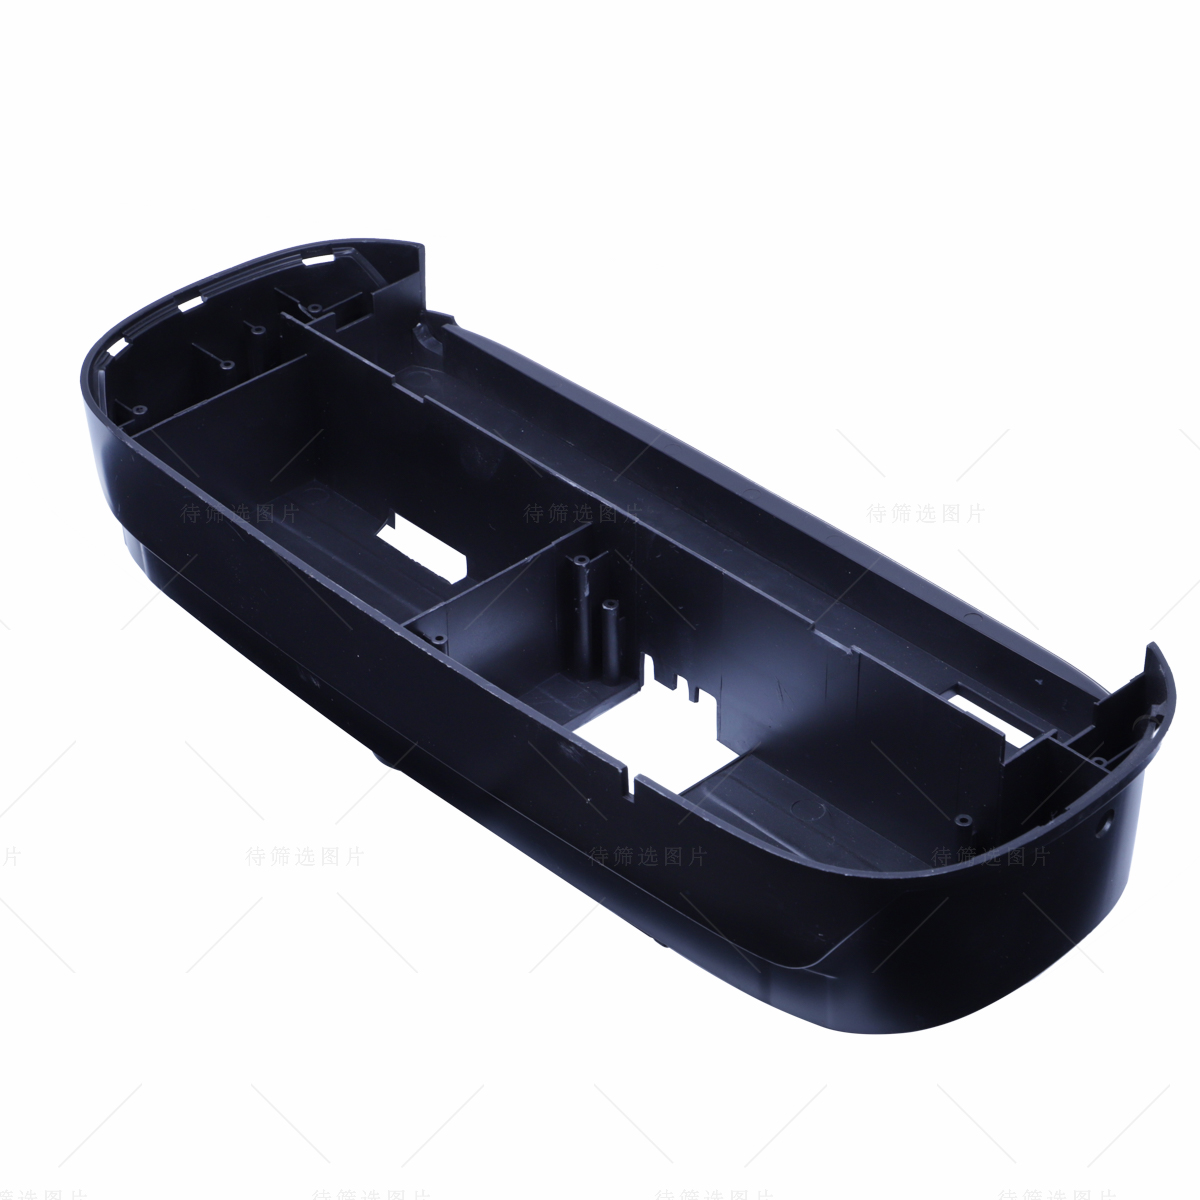 Focus on Custom Injection Molded Parts Overmolding Injection Molding Process With Factory Price